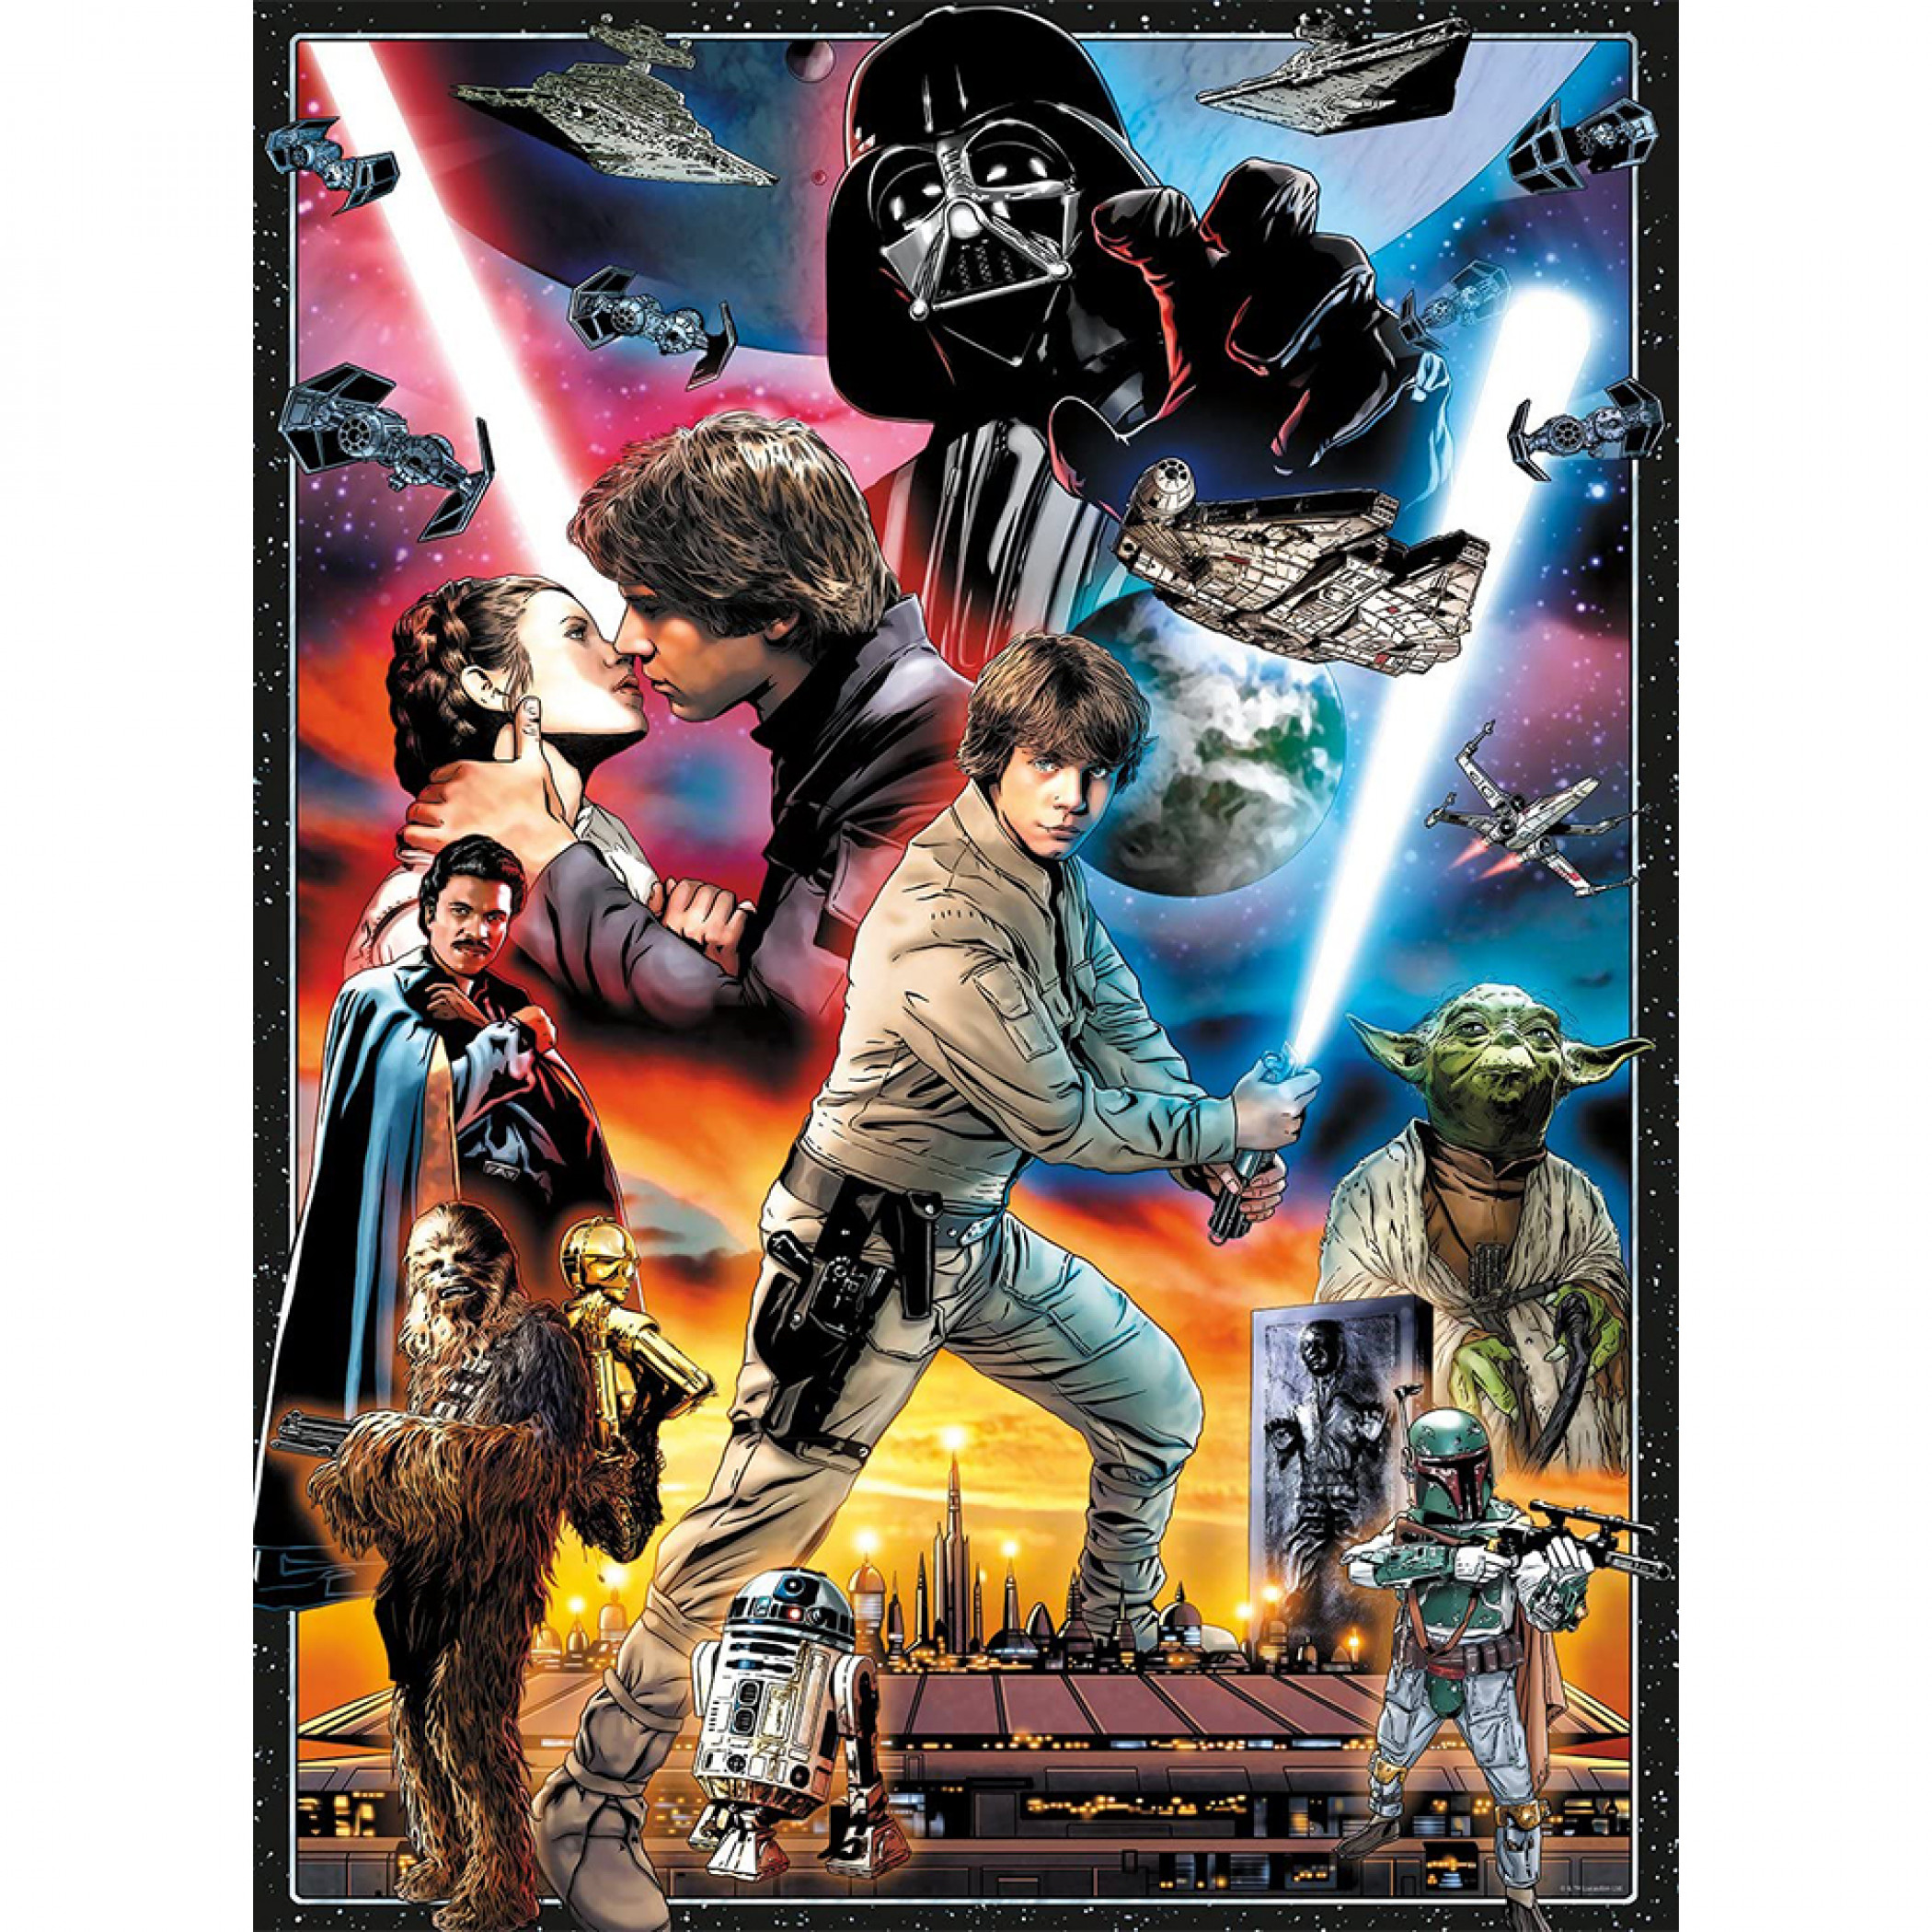 Star Wars The Empire Strikes Back Collage 1000 Piece Jigsaw Puzzle